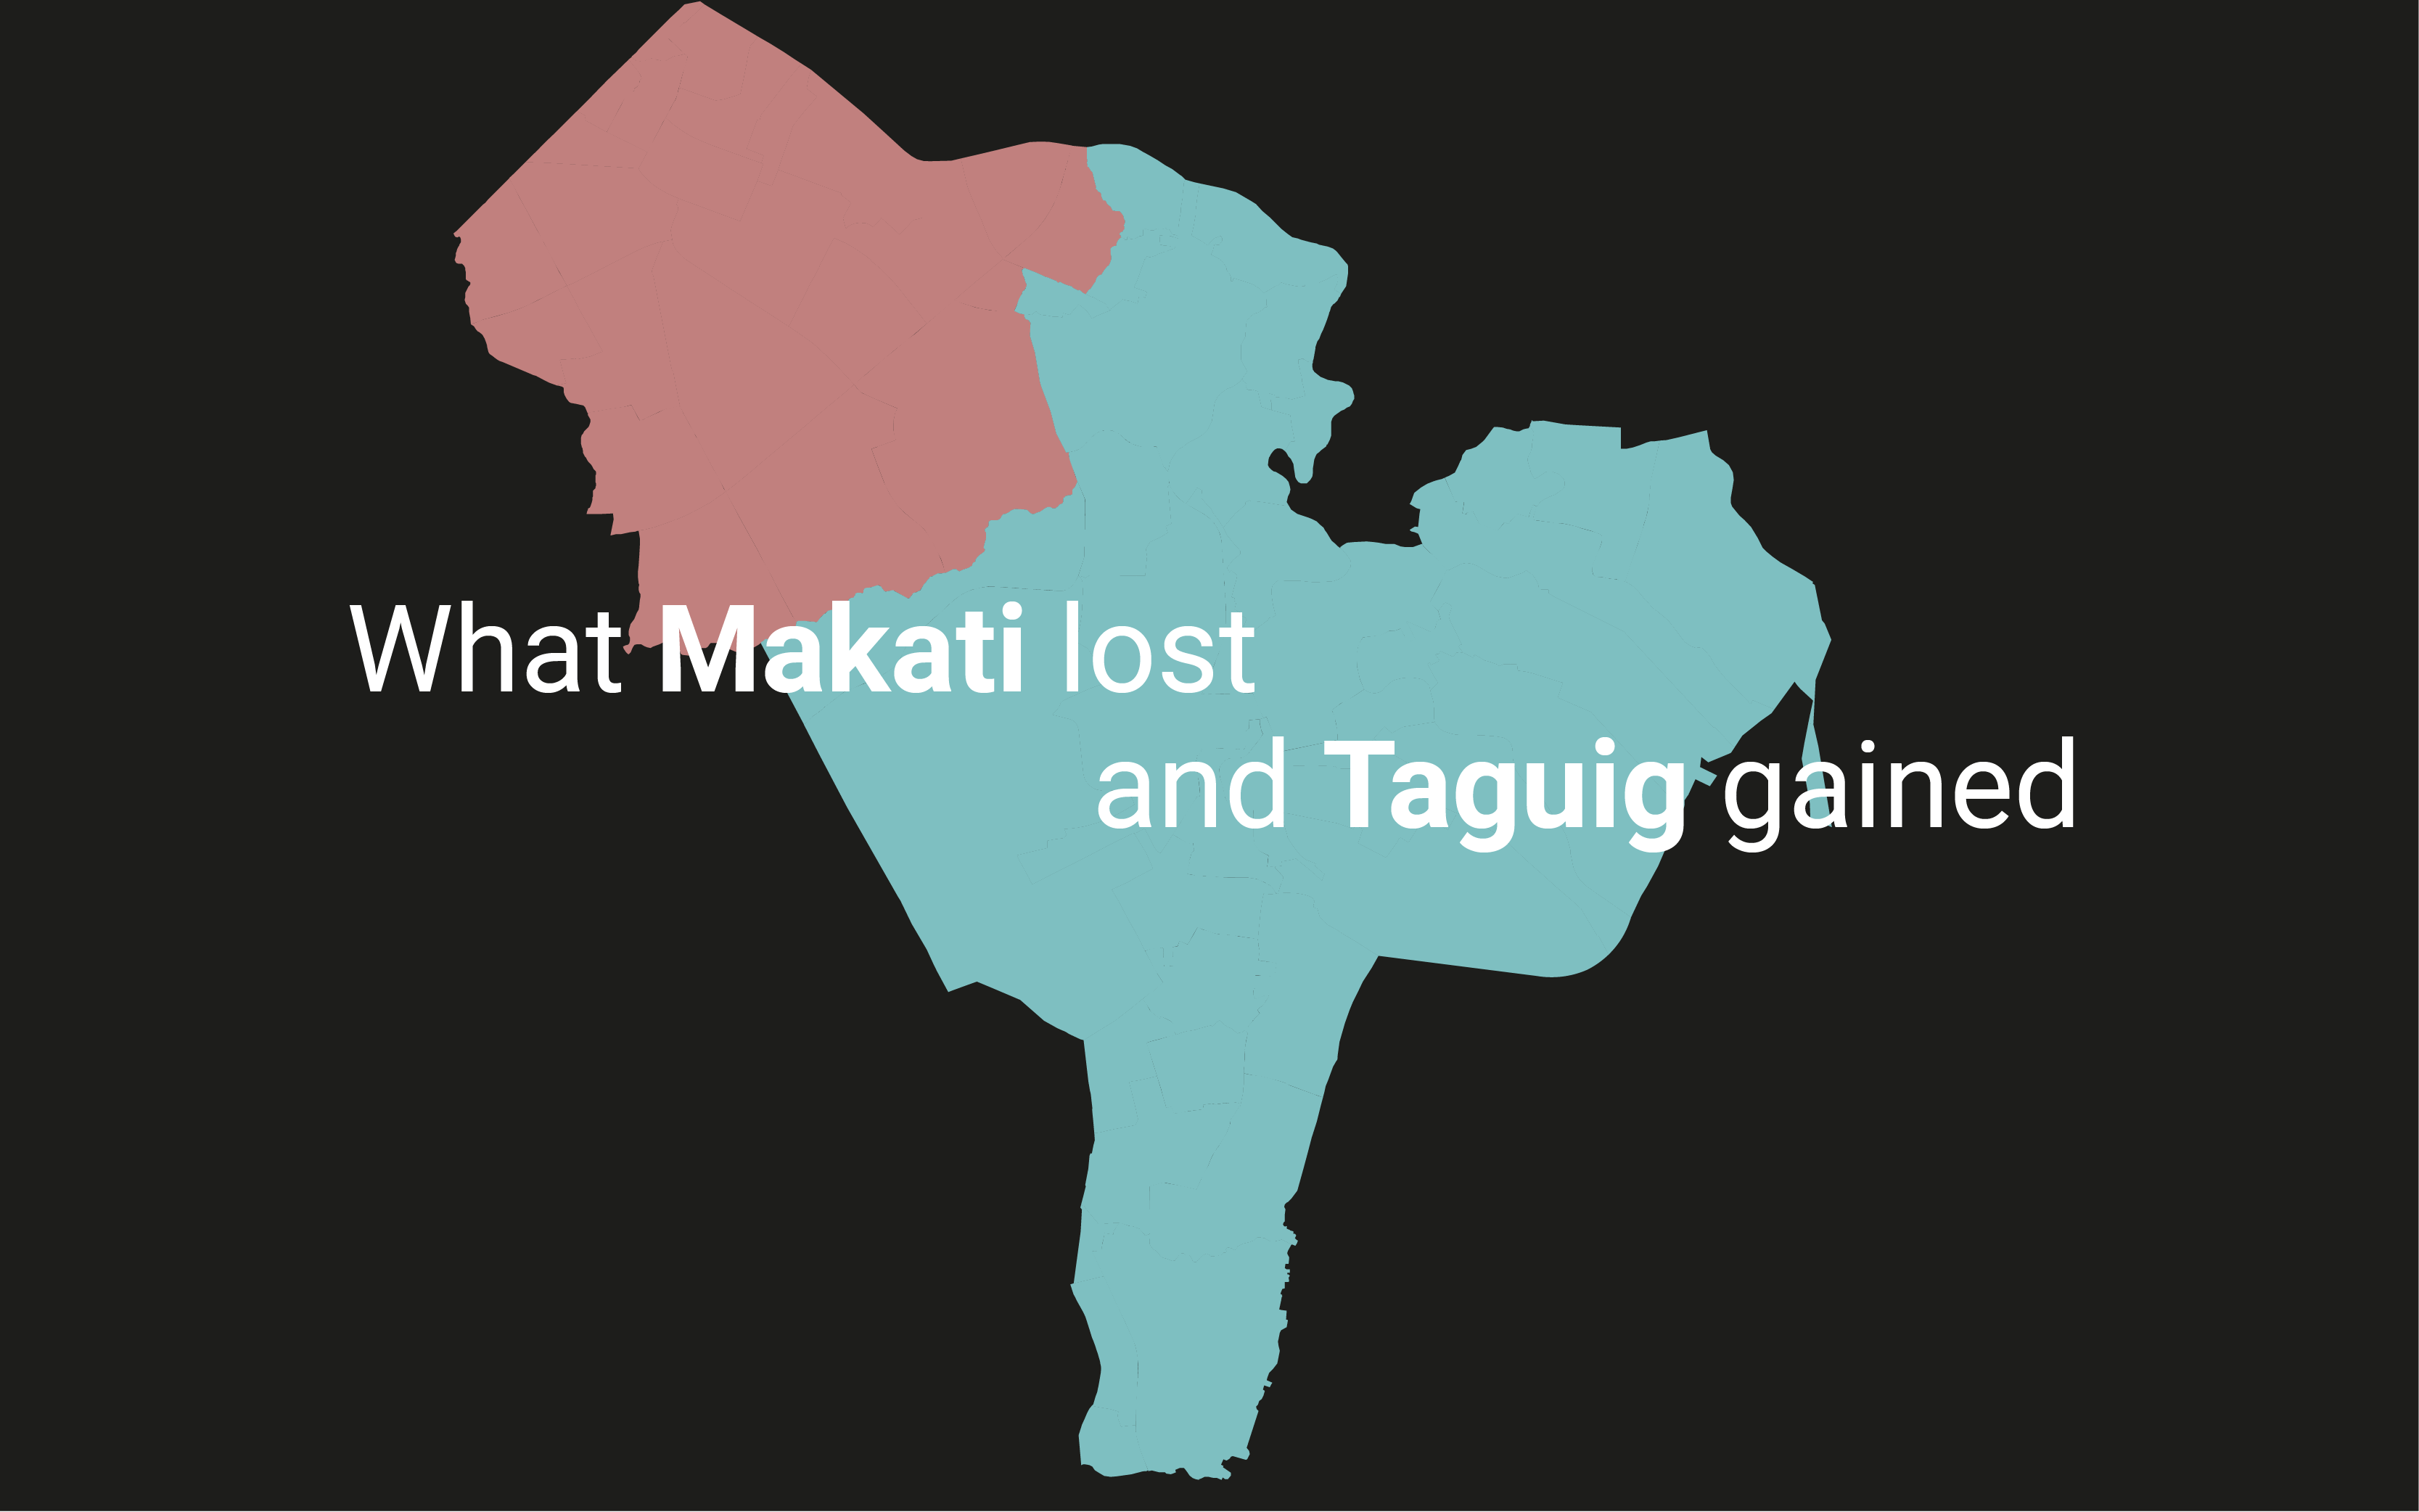 A title page cover that reads 'What Makati lost and Taguig gained' over a map of the two localities in Metro Manila in the Philippines.